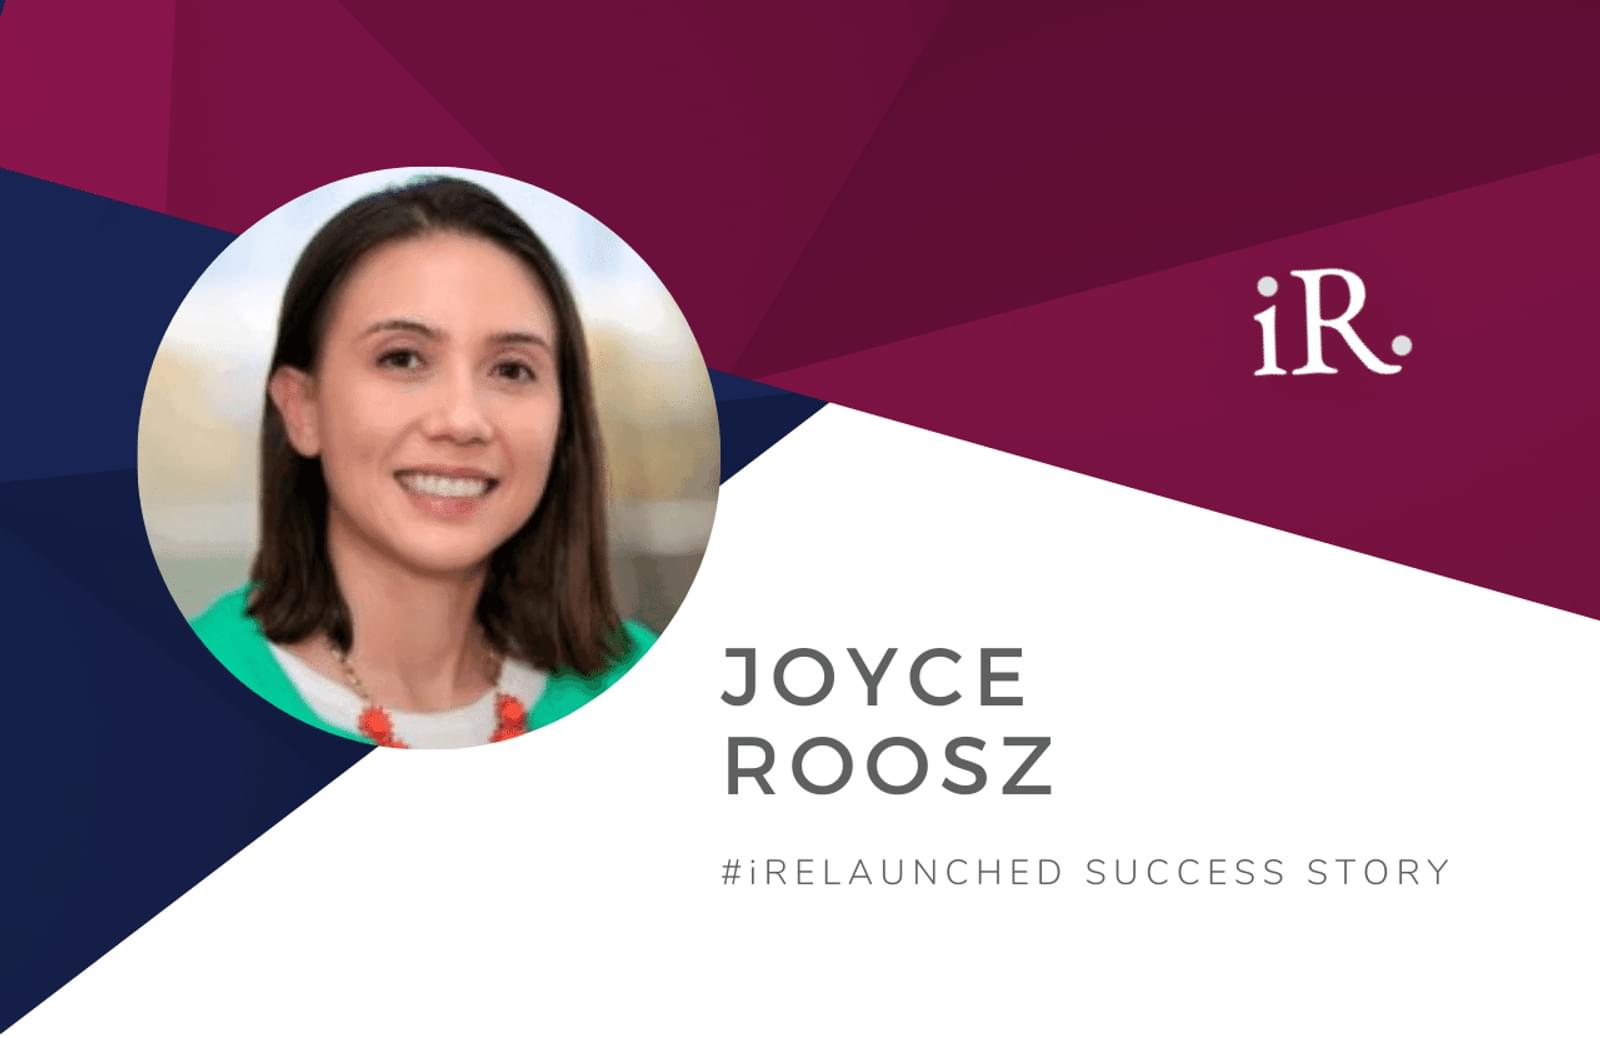 Joyce Roosz' headshot and the text #iRelaunched Success Story along with the iRelaunch logo.  A navy and maroon geometric textured background intersect behind Joyce's headshot.